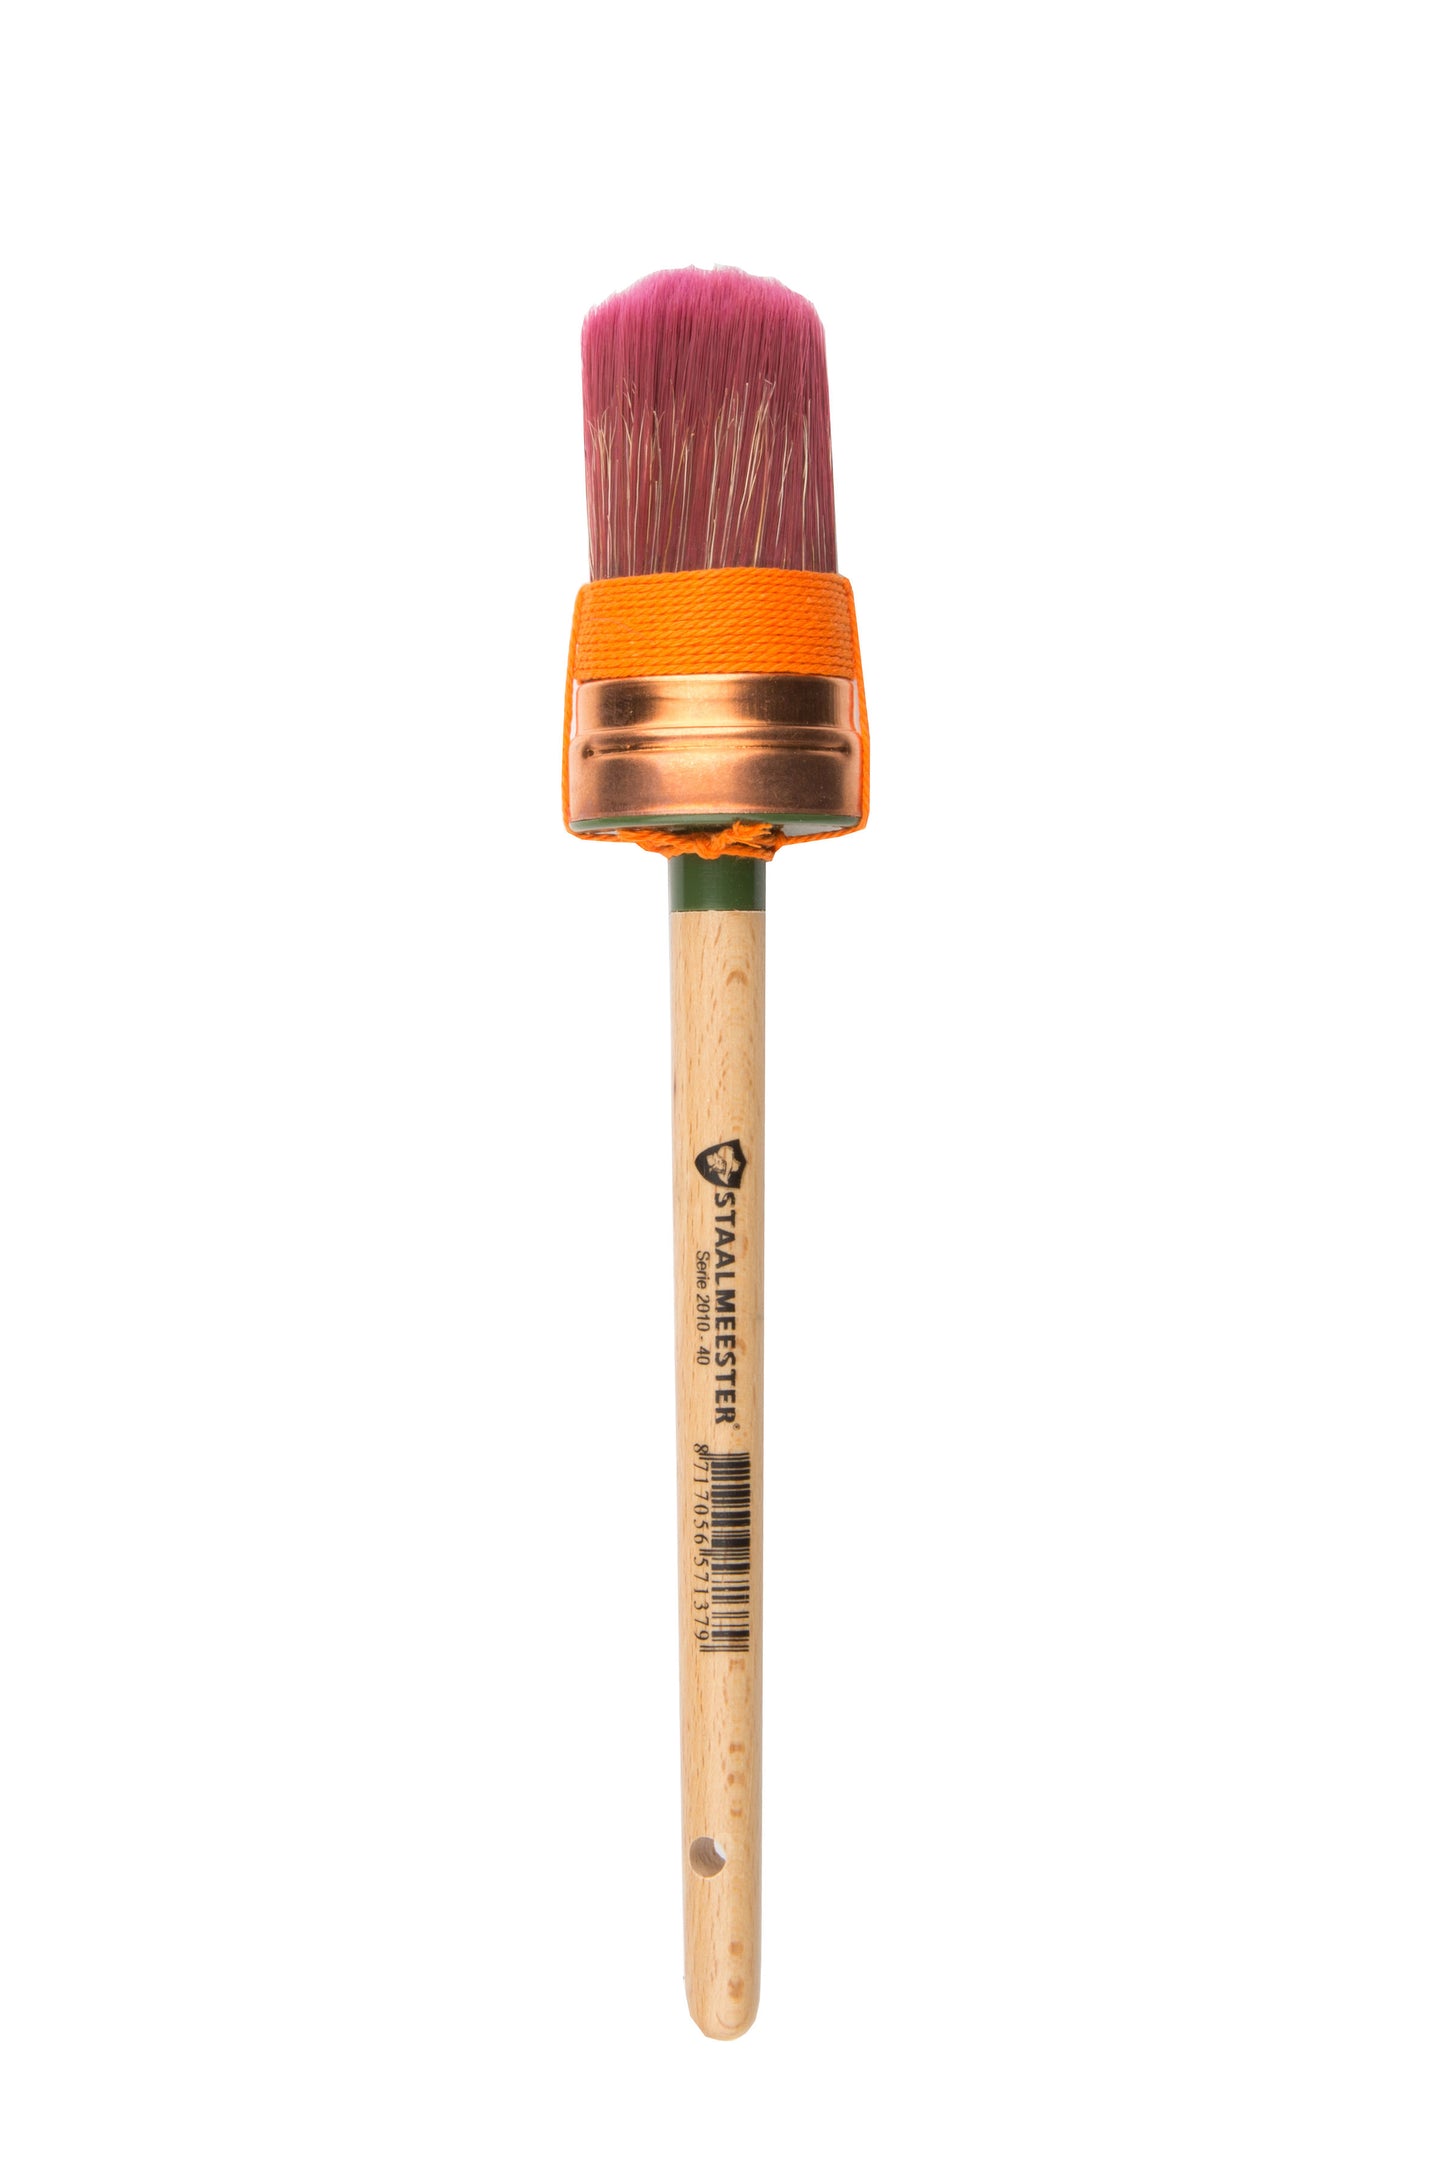 Paint Brush - Staalmeester Oval #40